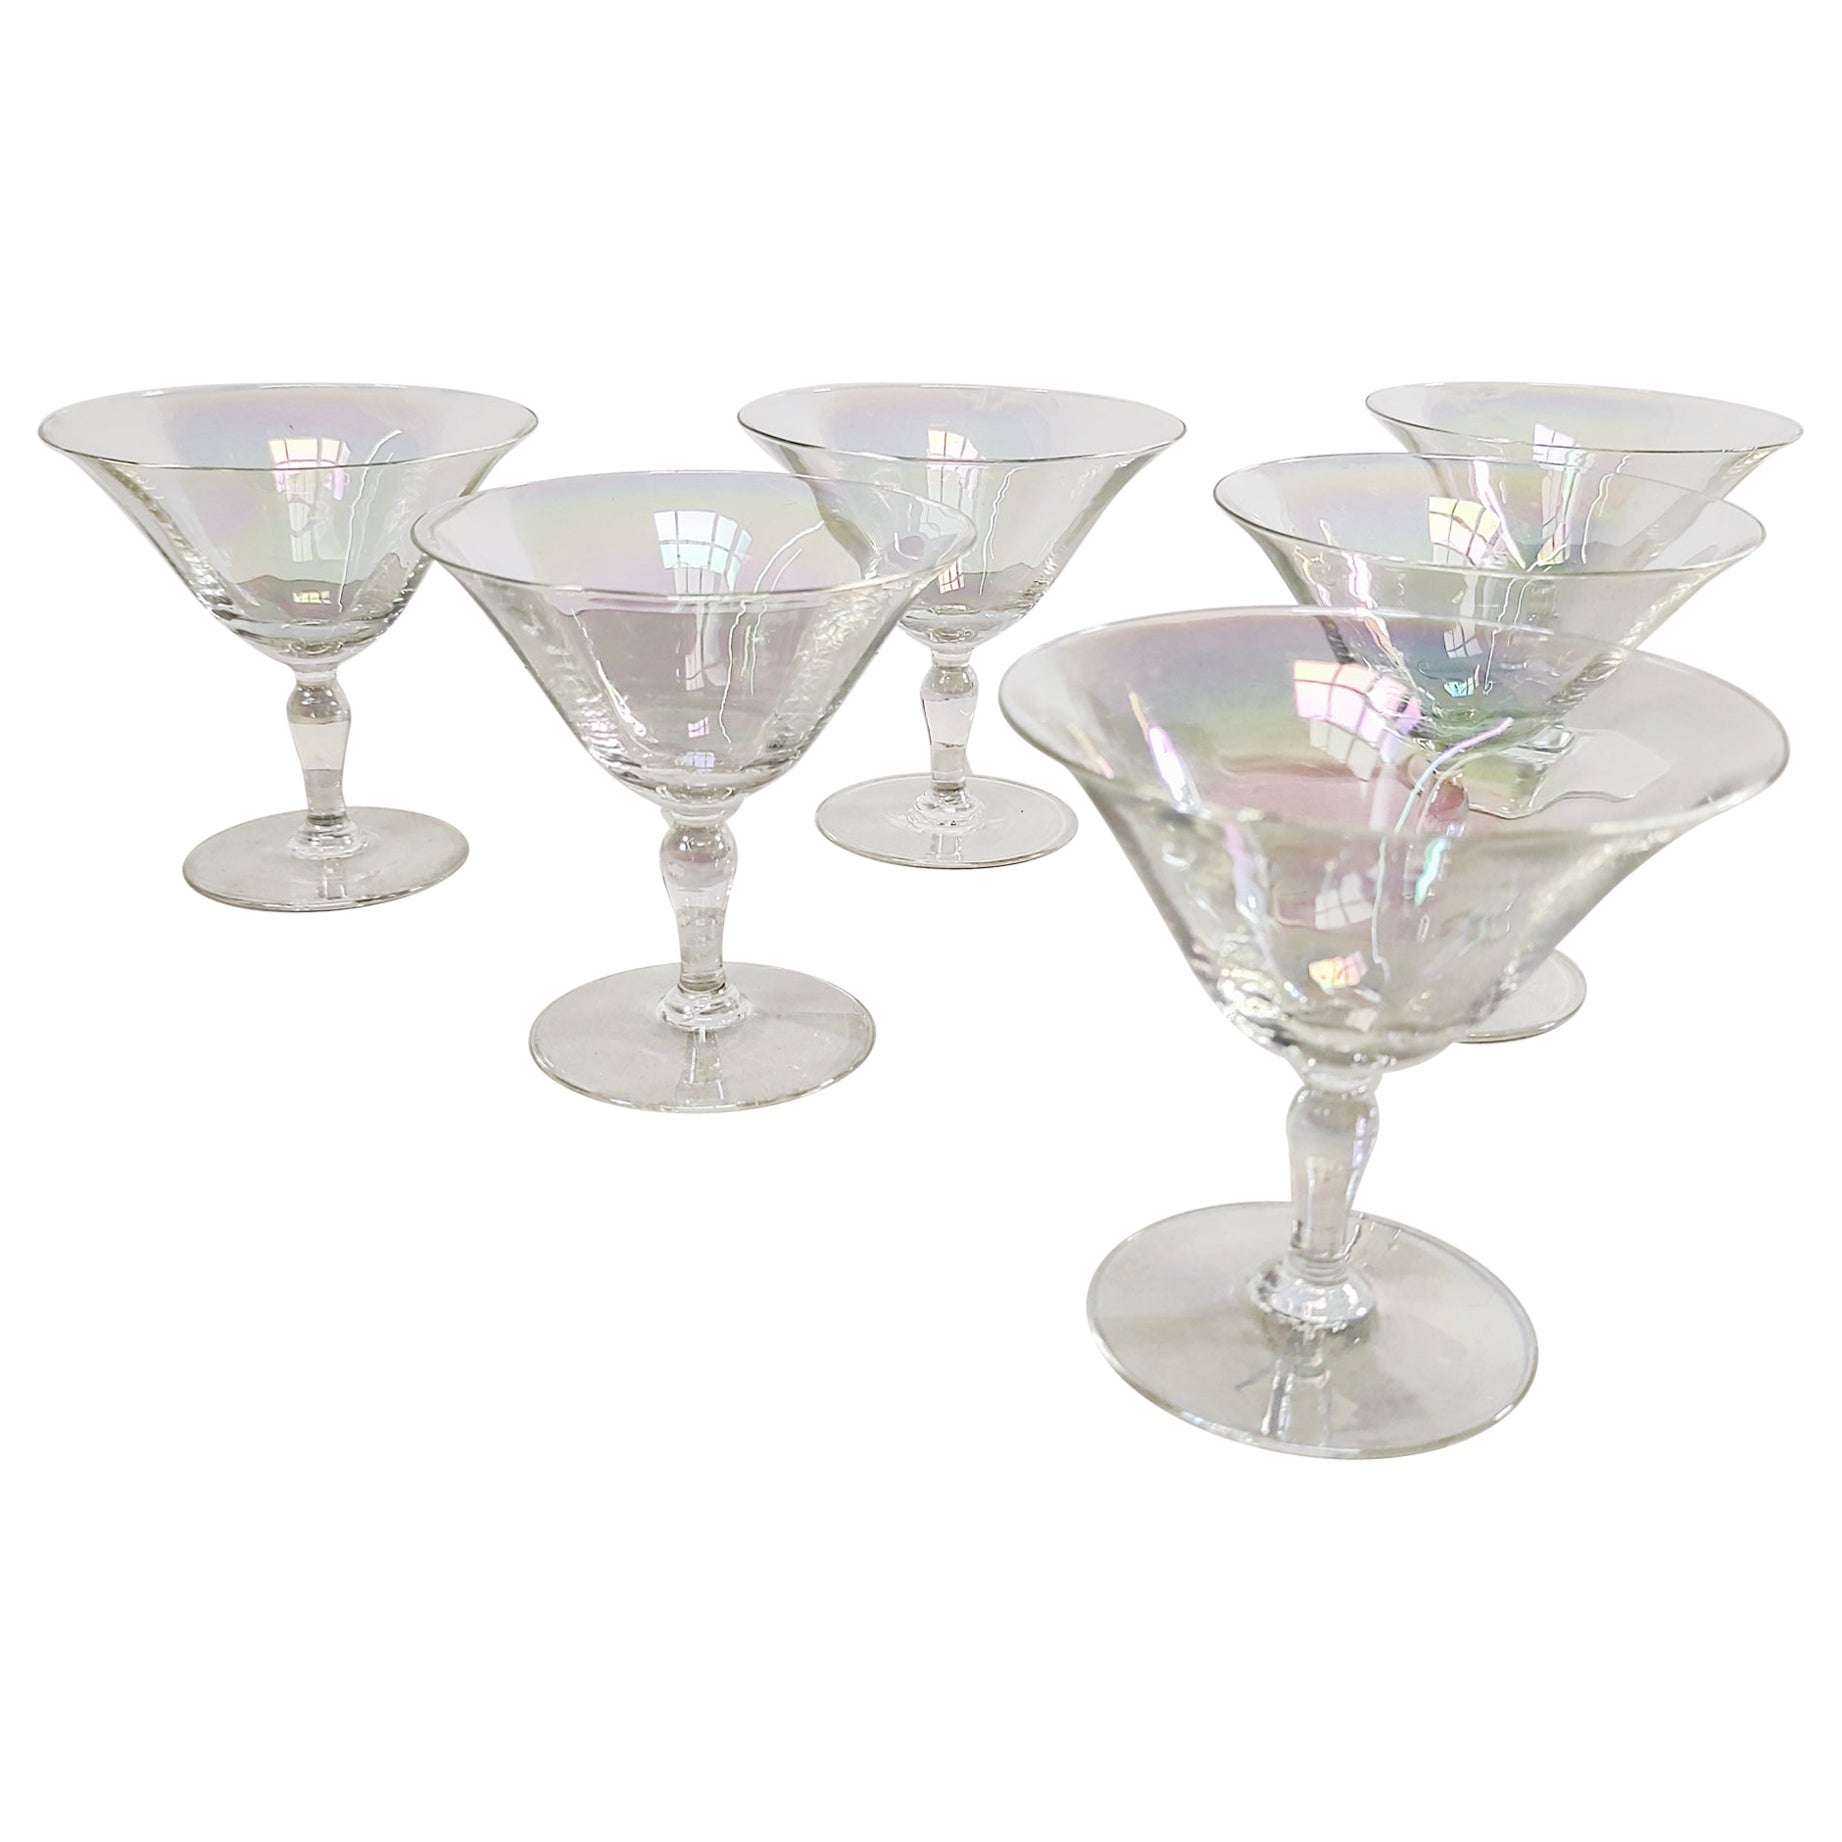 Couleurs assorties Verre Martini Drink Set Textured Cone Footed